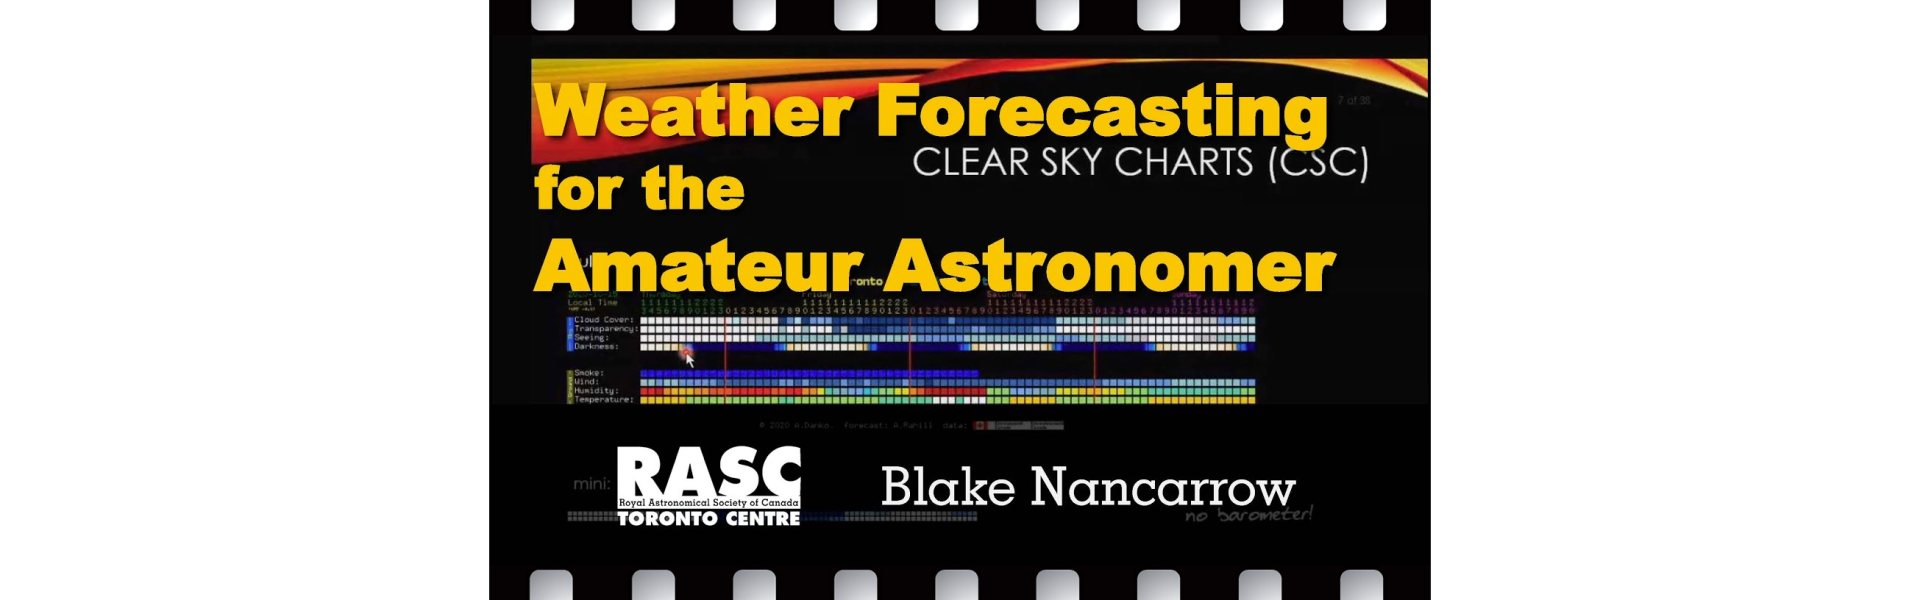 Weather Forecasting for the Amateur Astronomer